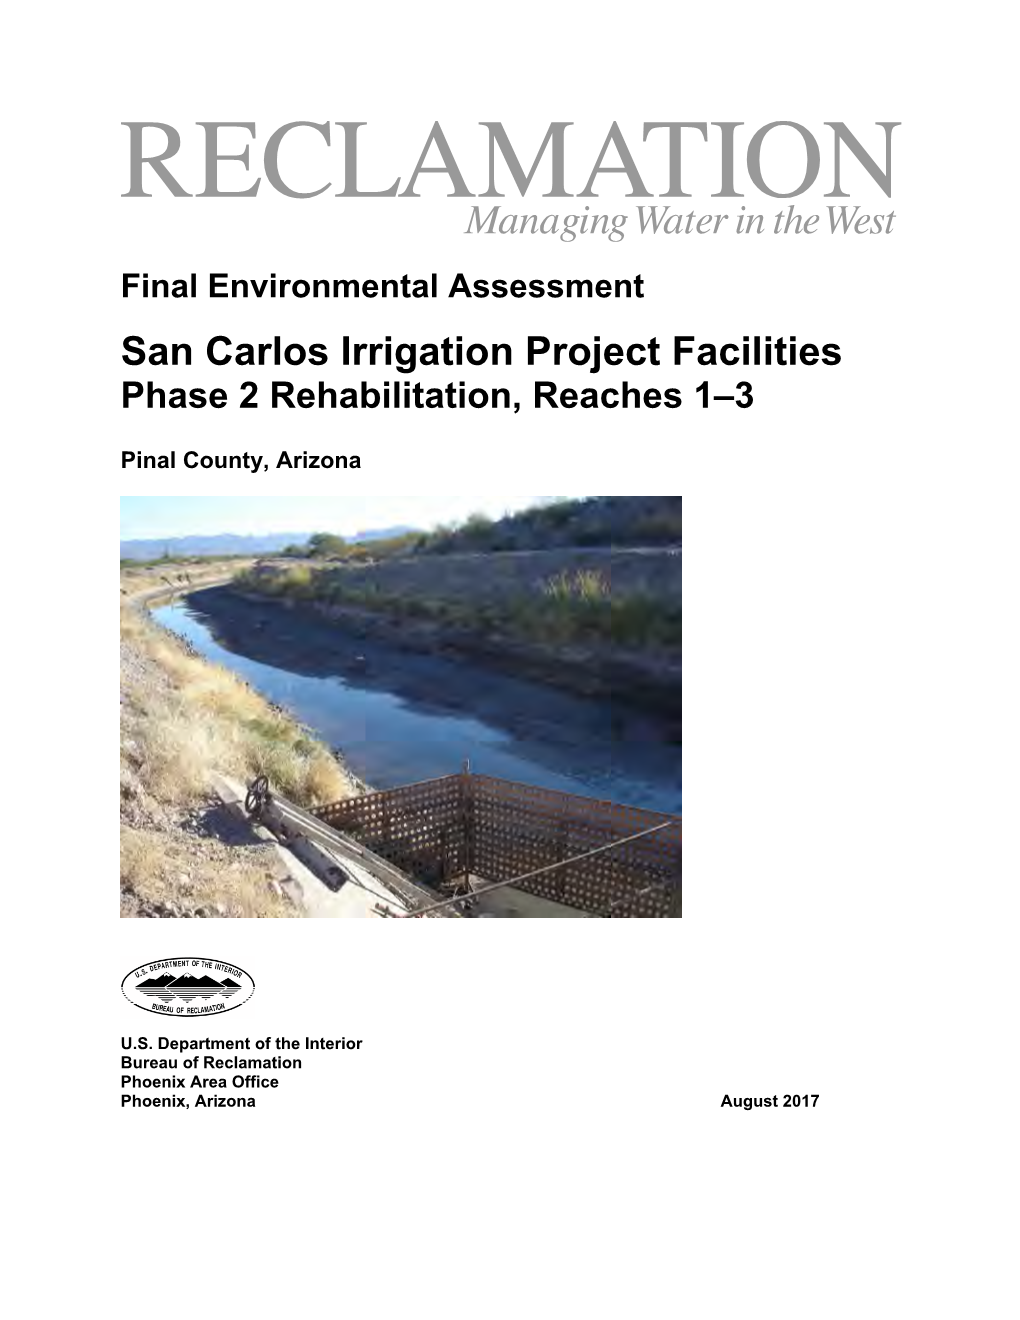 Environmental Assessment (EA) for the Rehabilitation of San Carlos Irrigation Project Facilities